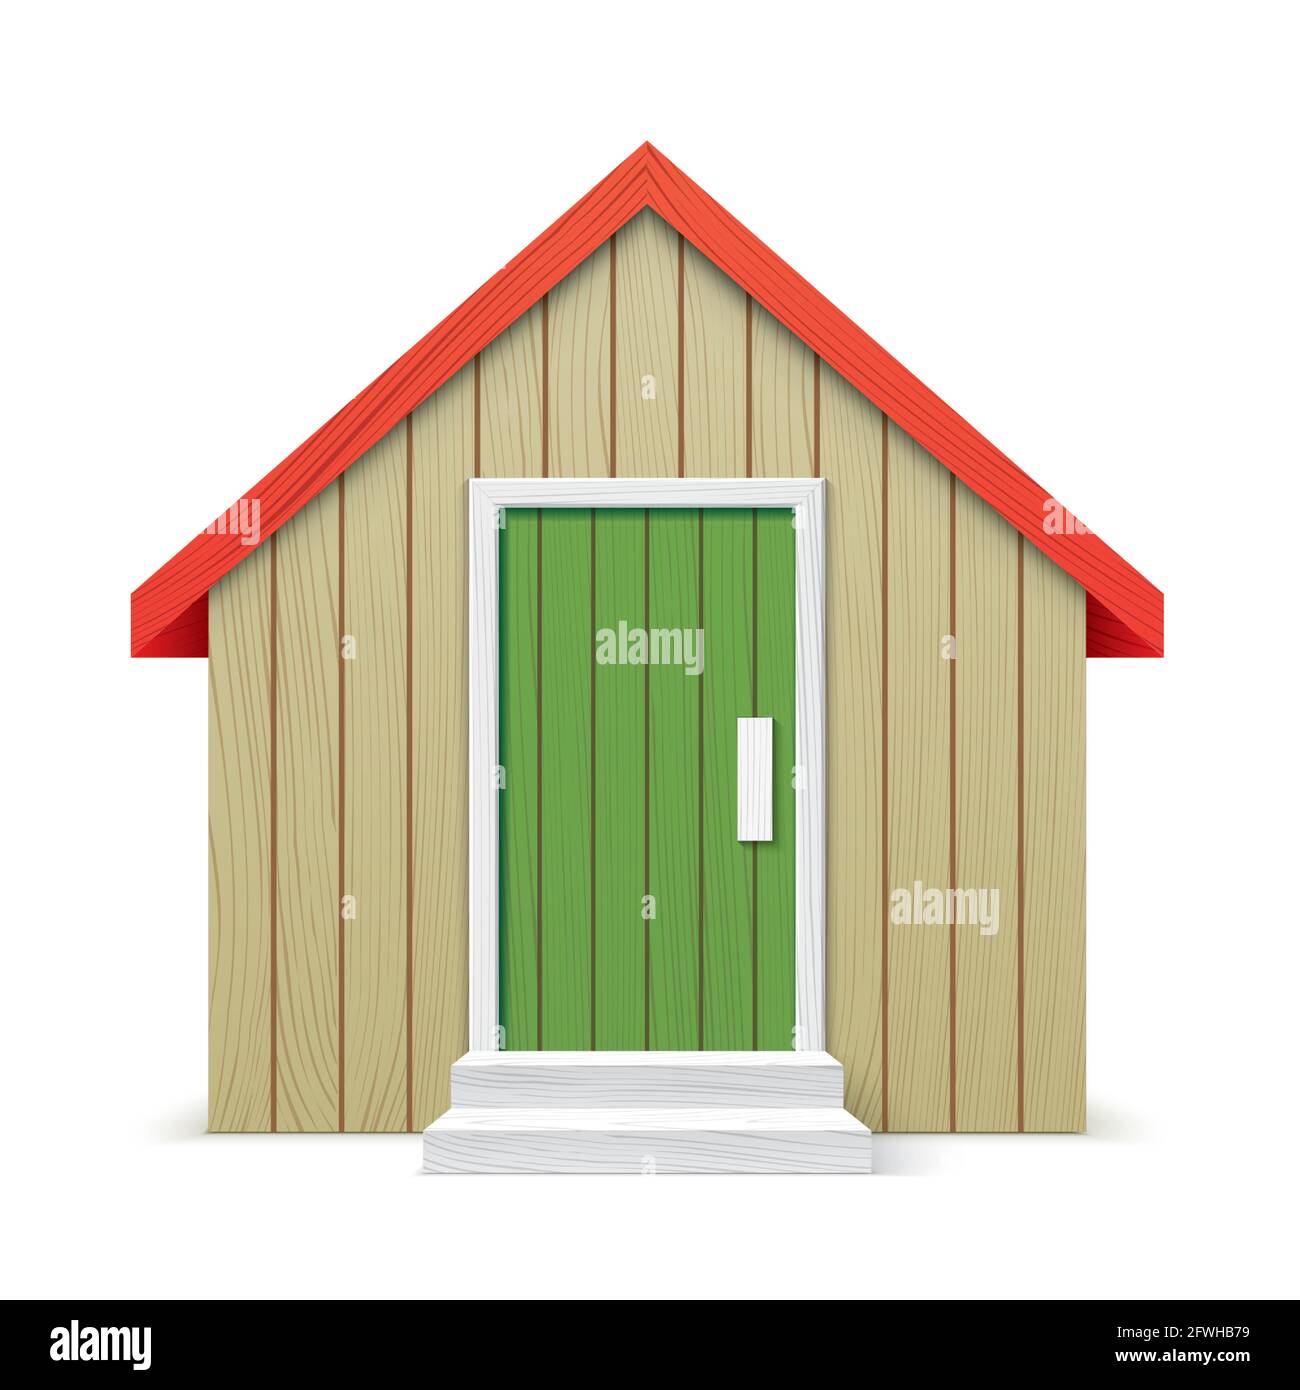 Wooden village house, vector illustration. Simple shape cottage isolated on background. Stock Vector